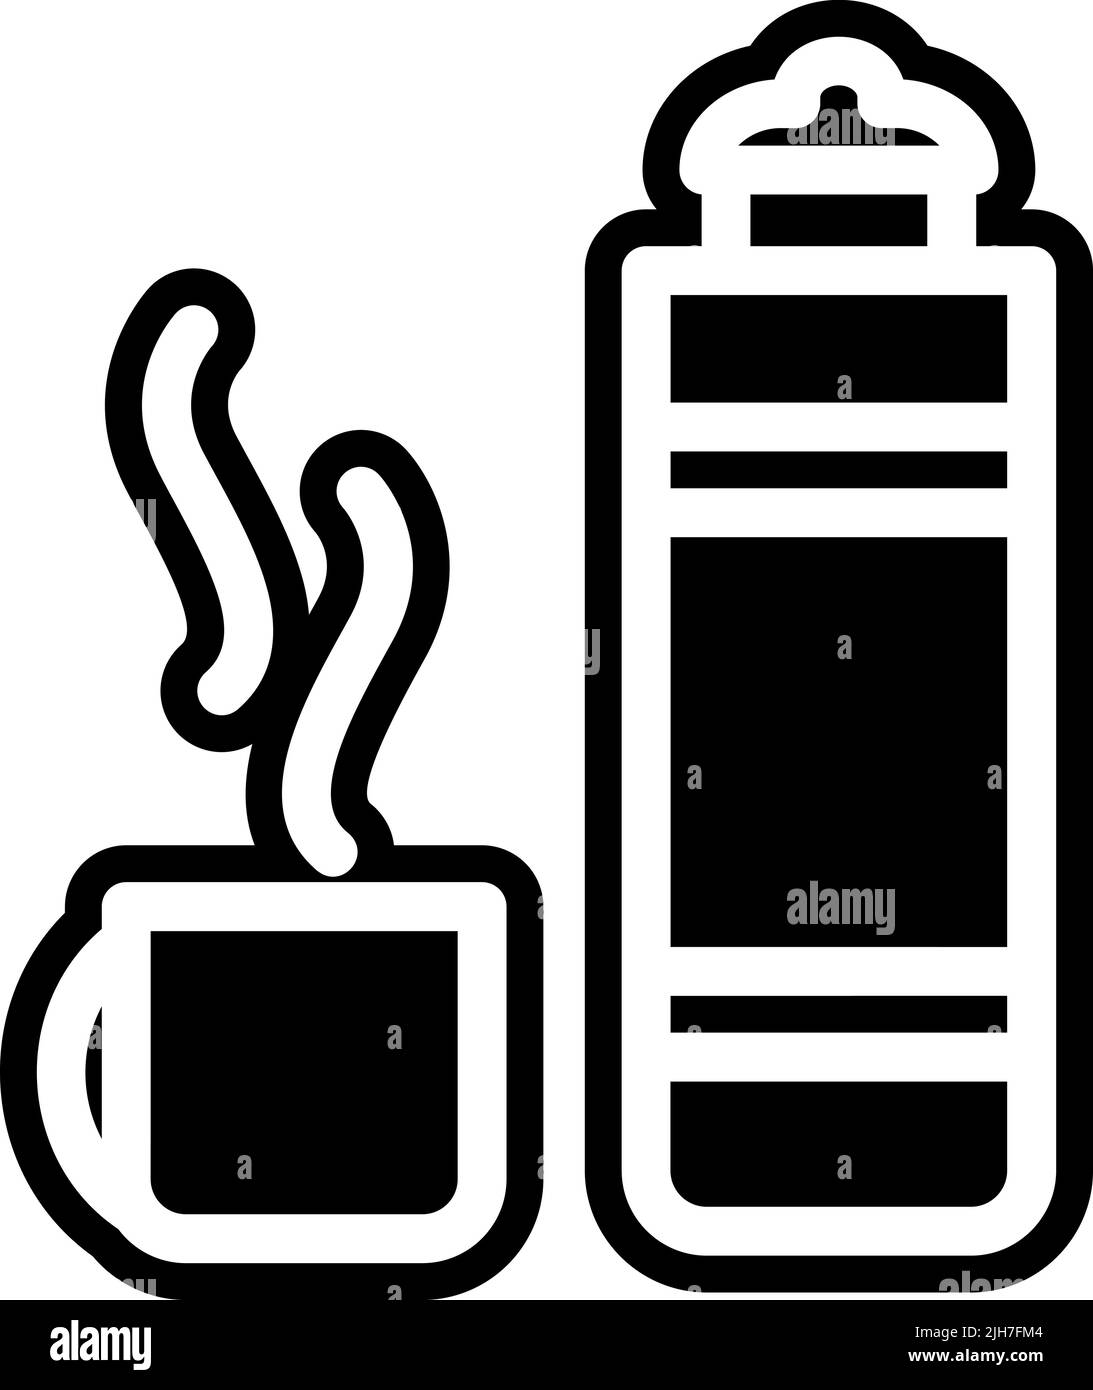 Camping thermos icon Stock Vector